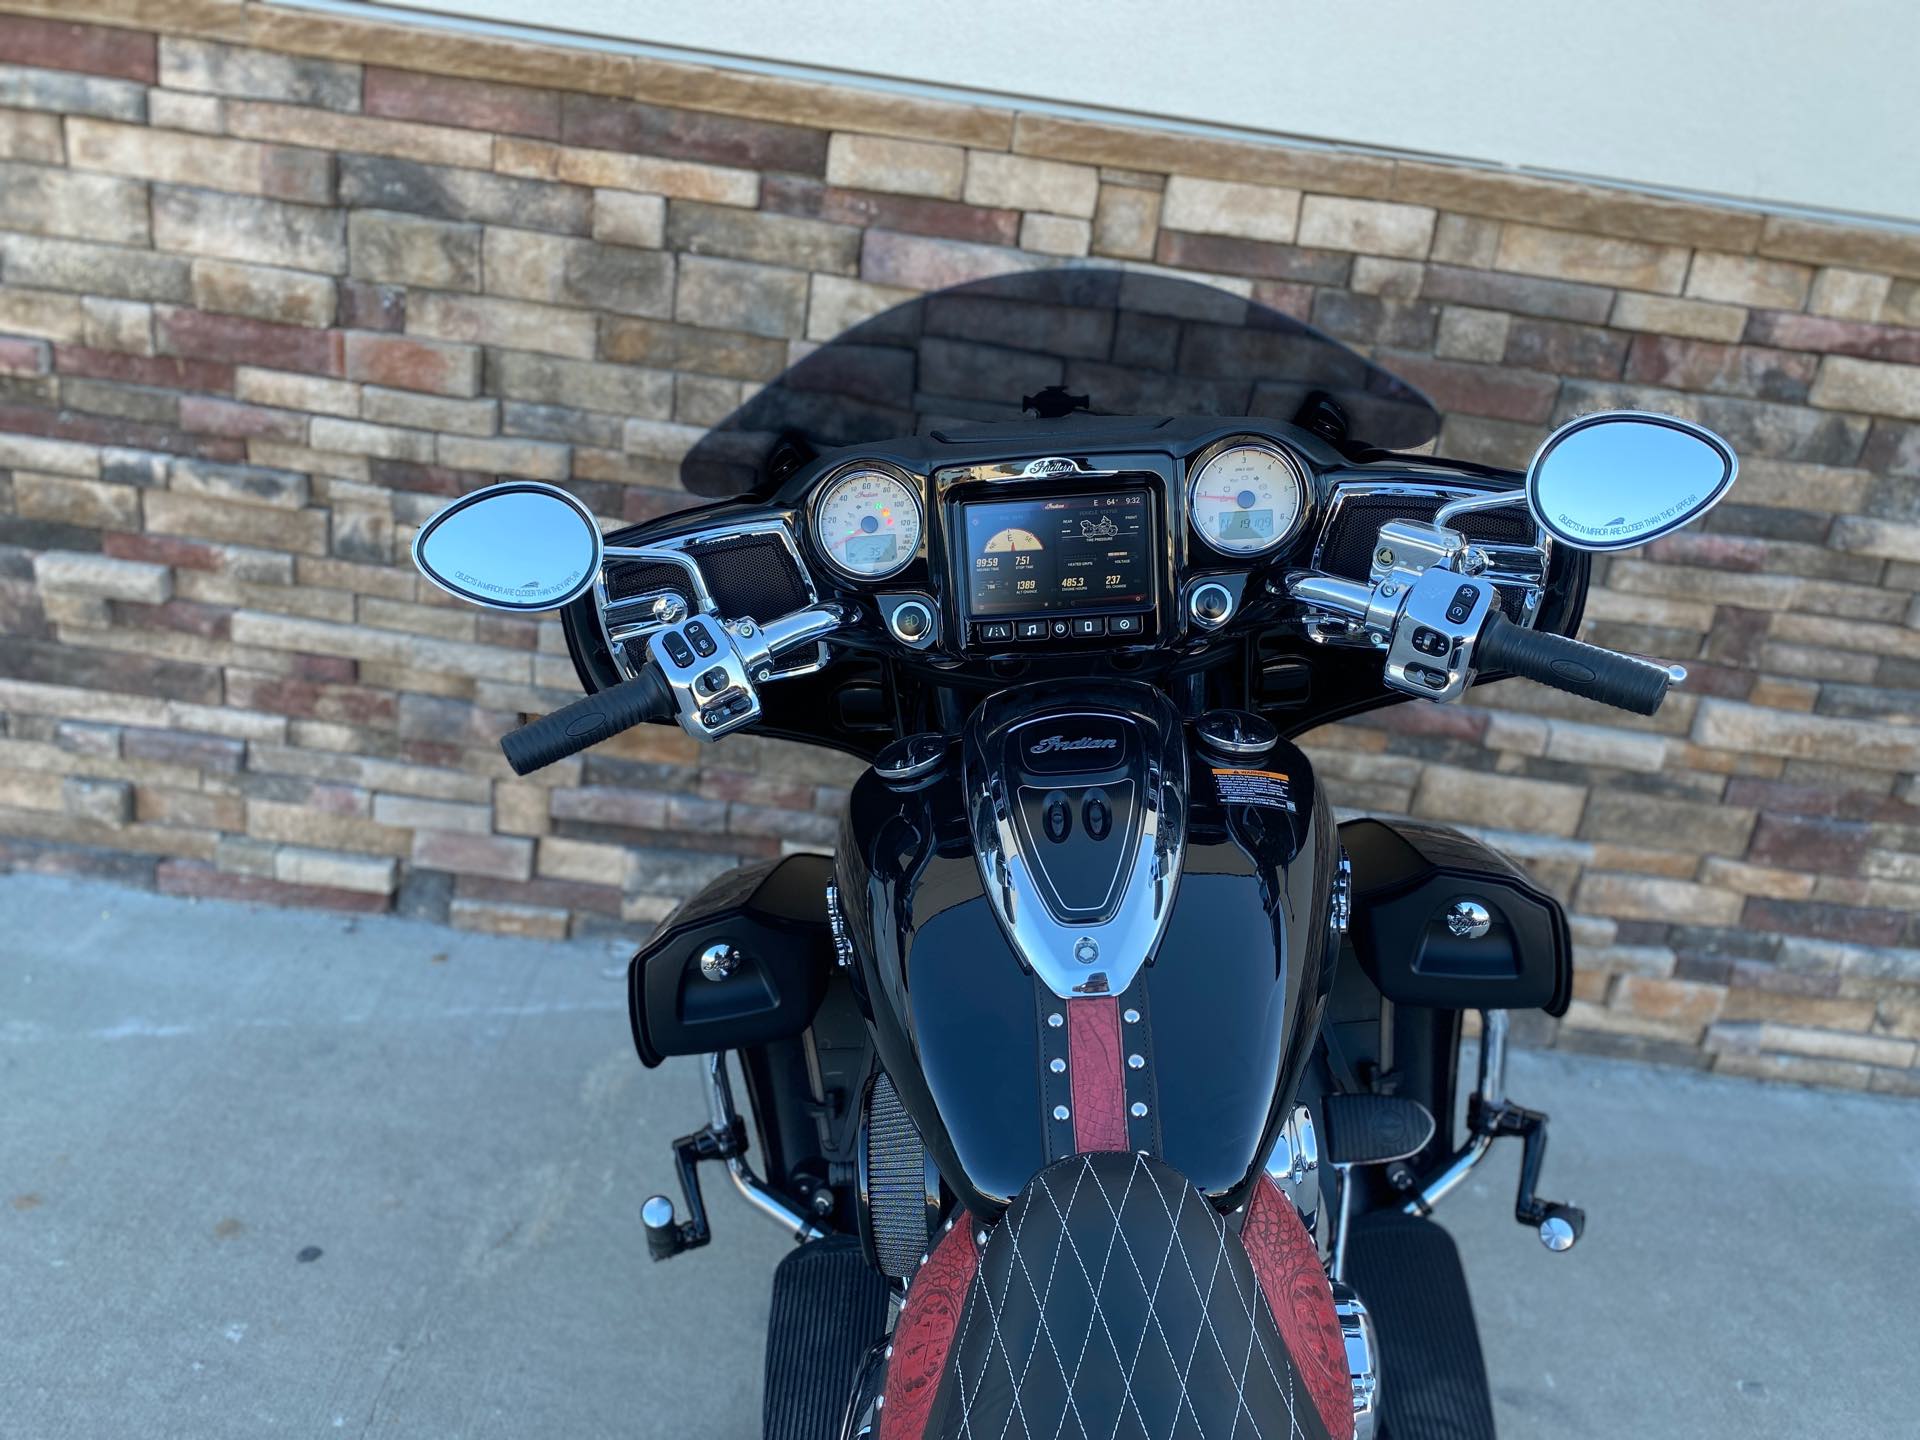 2019 Indian Roadmaster Base at Head Indian Motorcycle